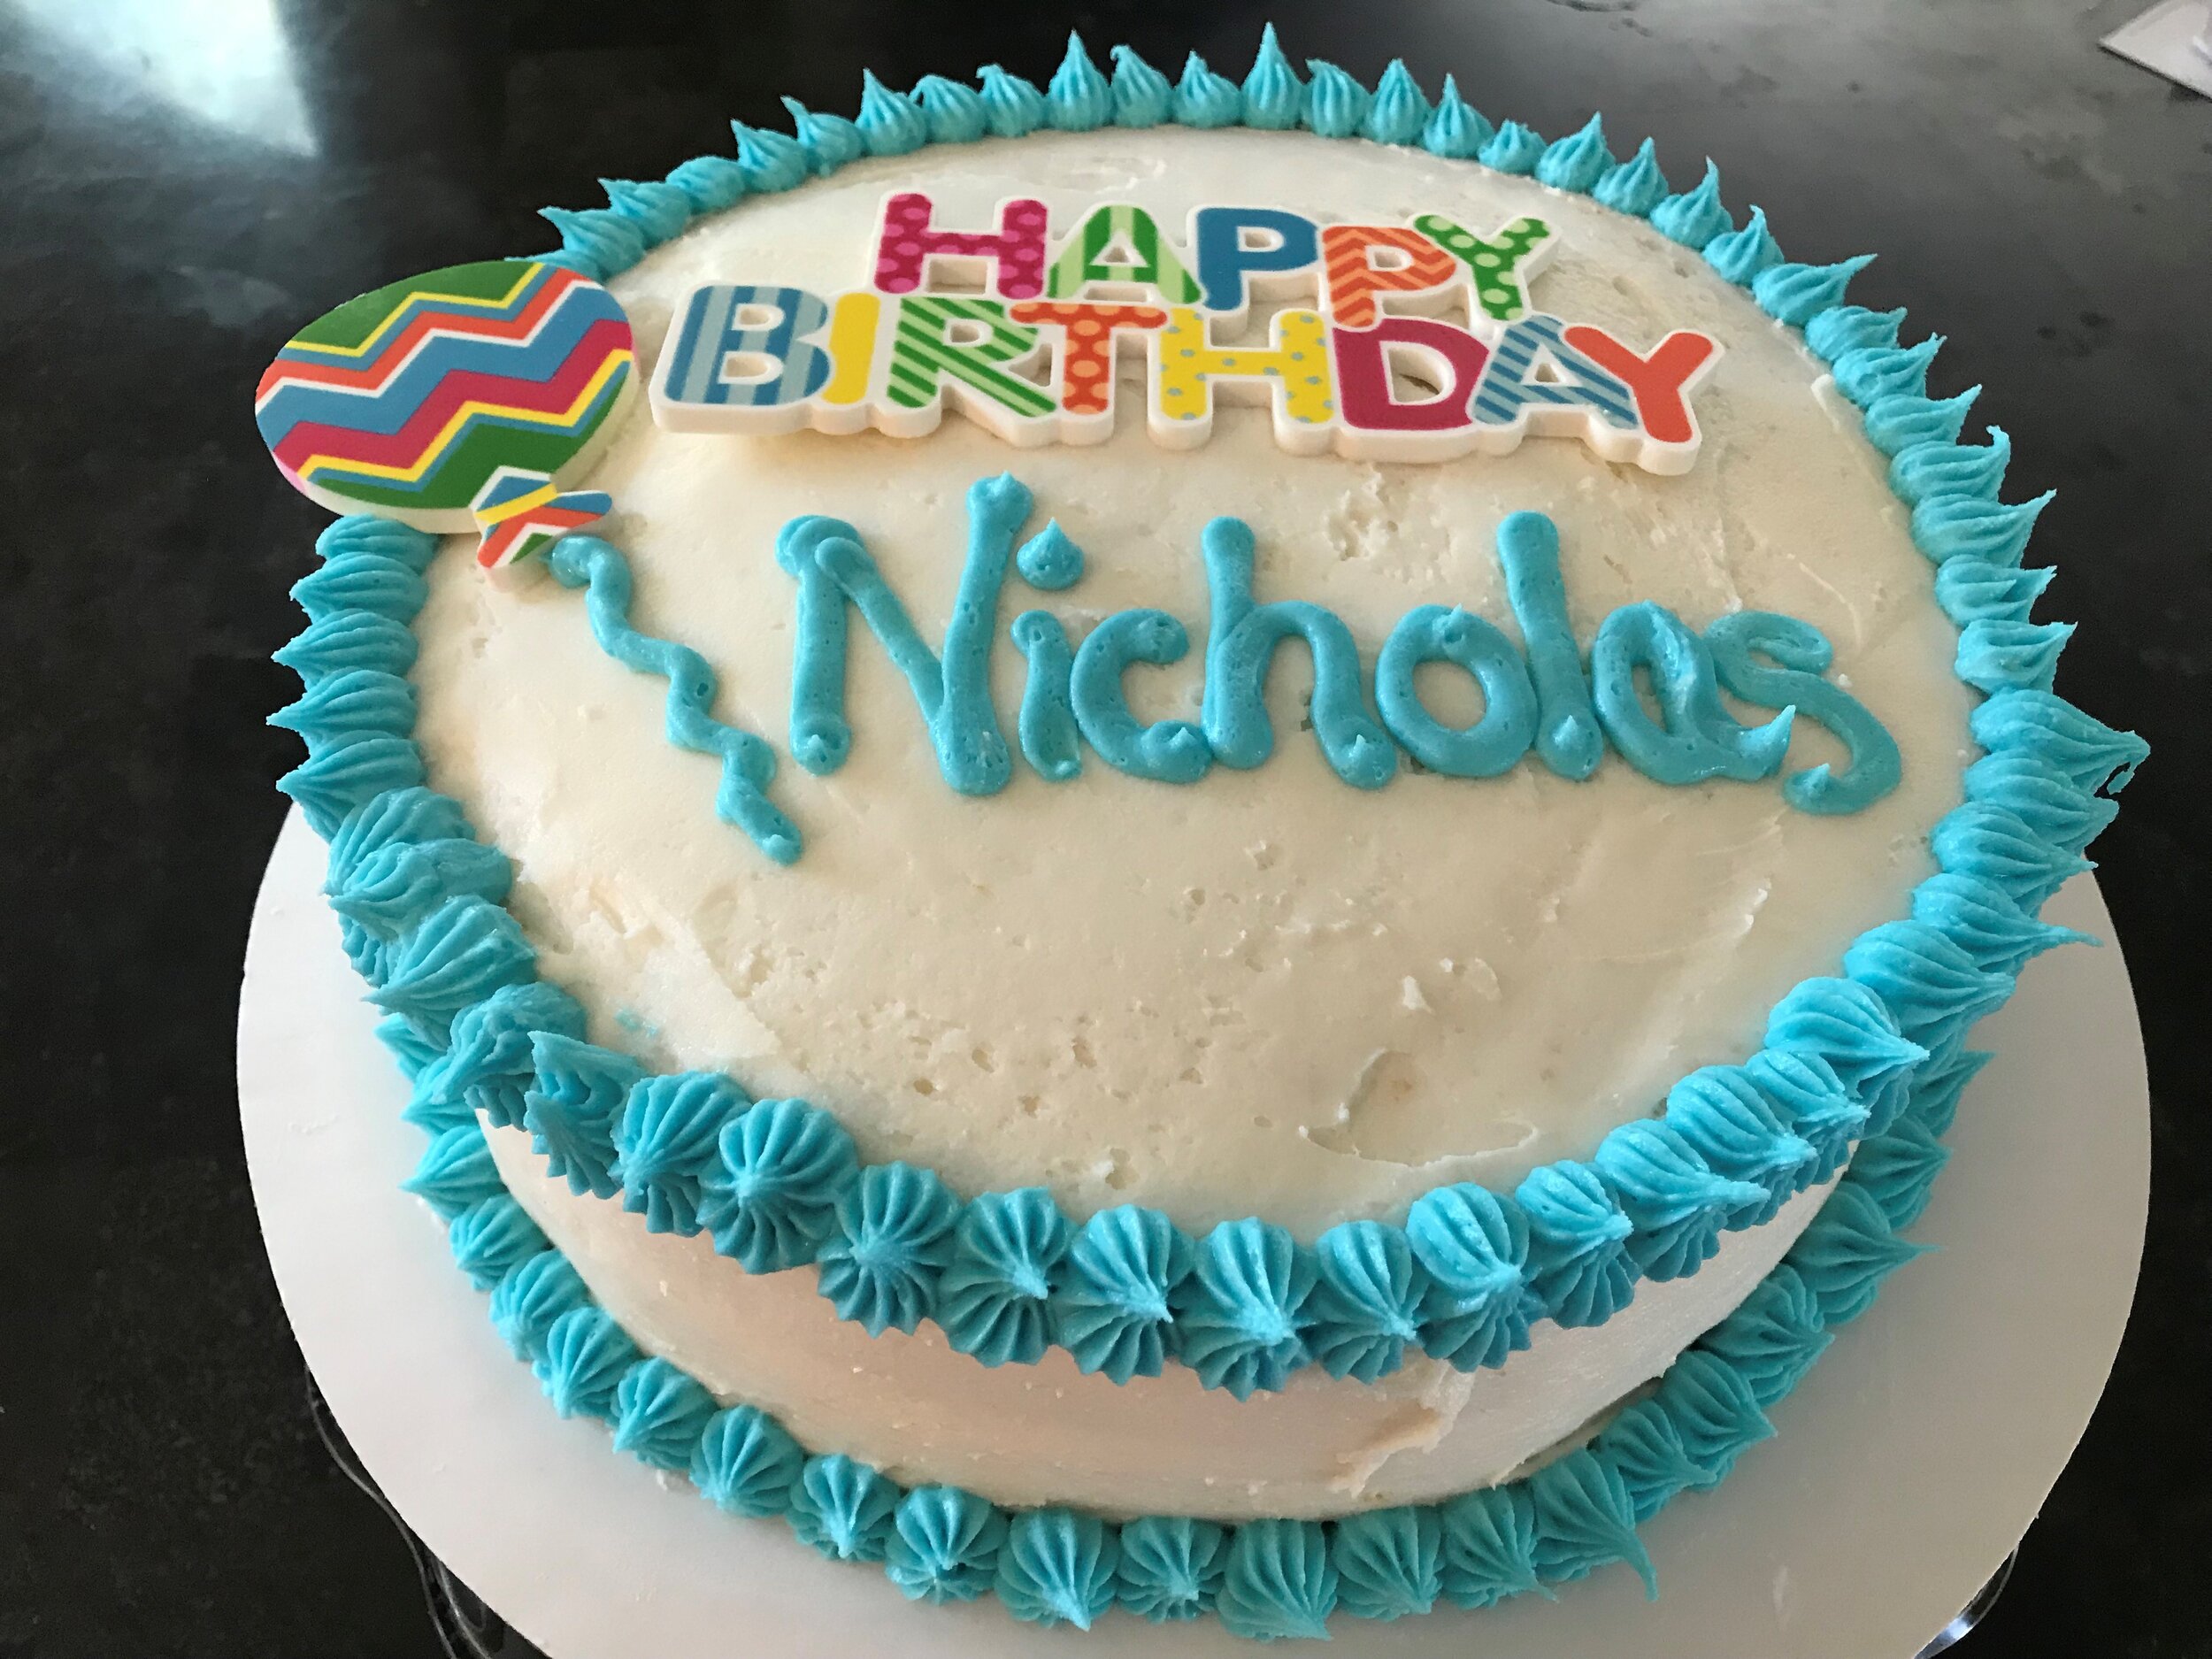 Our Chapters: Northern Virginia — Cake4Kids